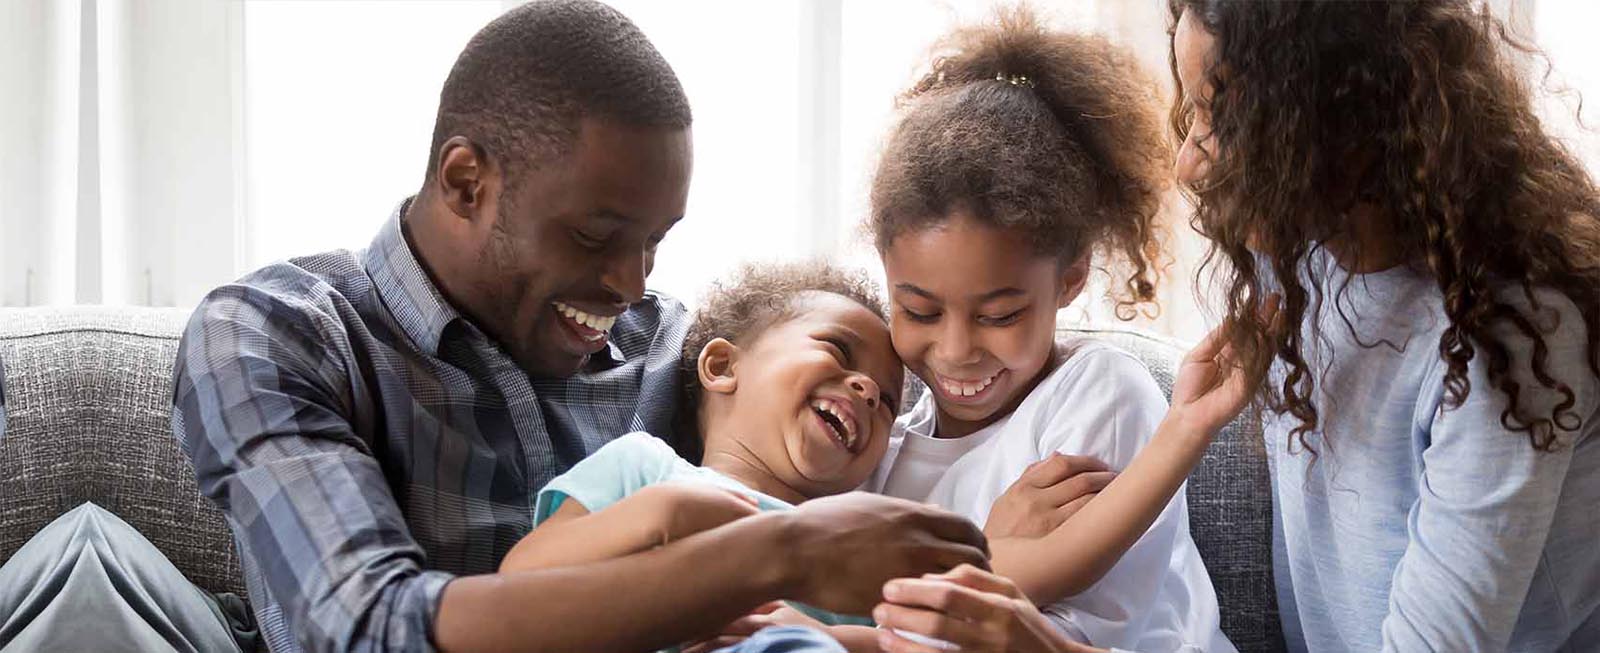 Happy black parents have fun with little mixed race kids tickling on couch at home, smiling African American family laugh playing together in living room, mom and dad relax on sofa with children